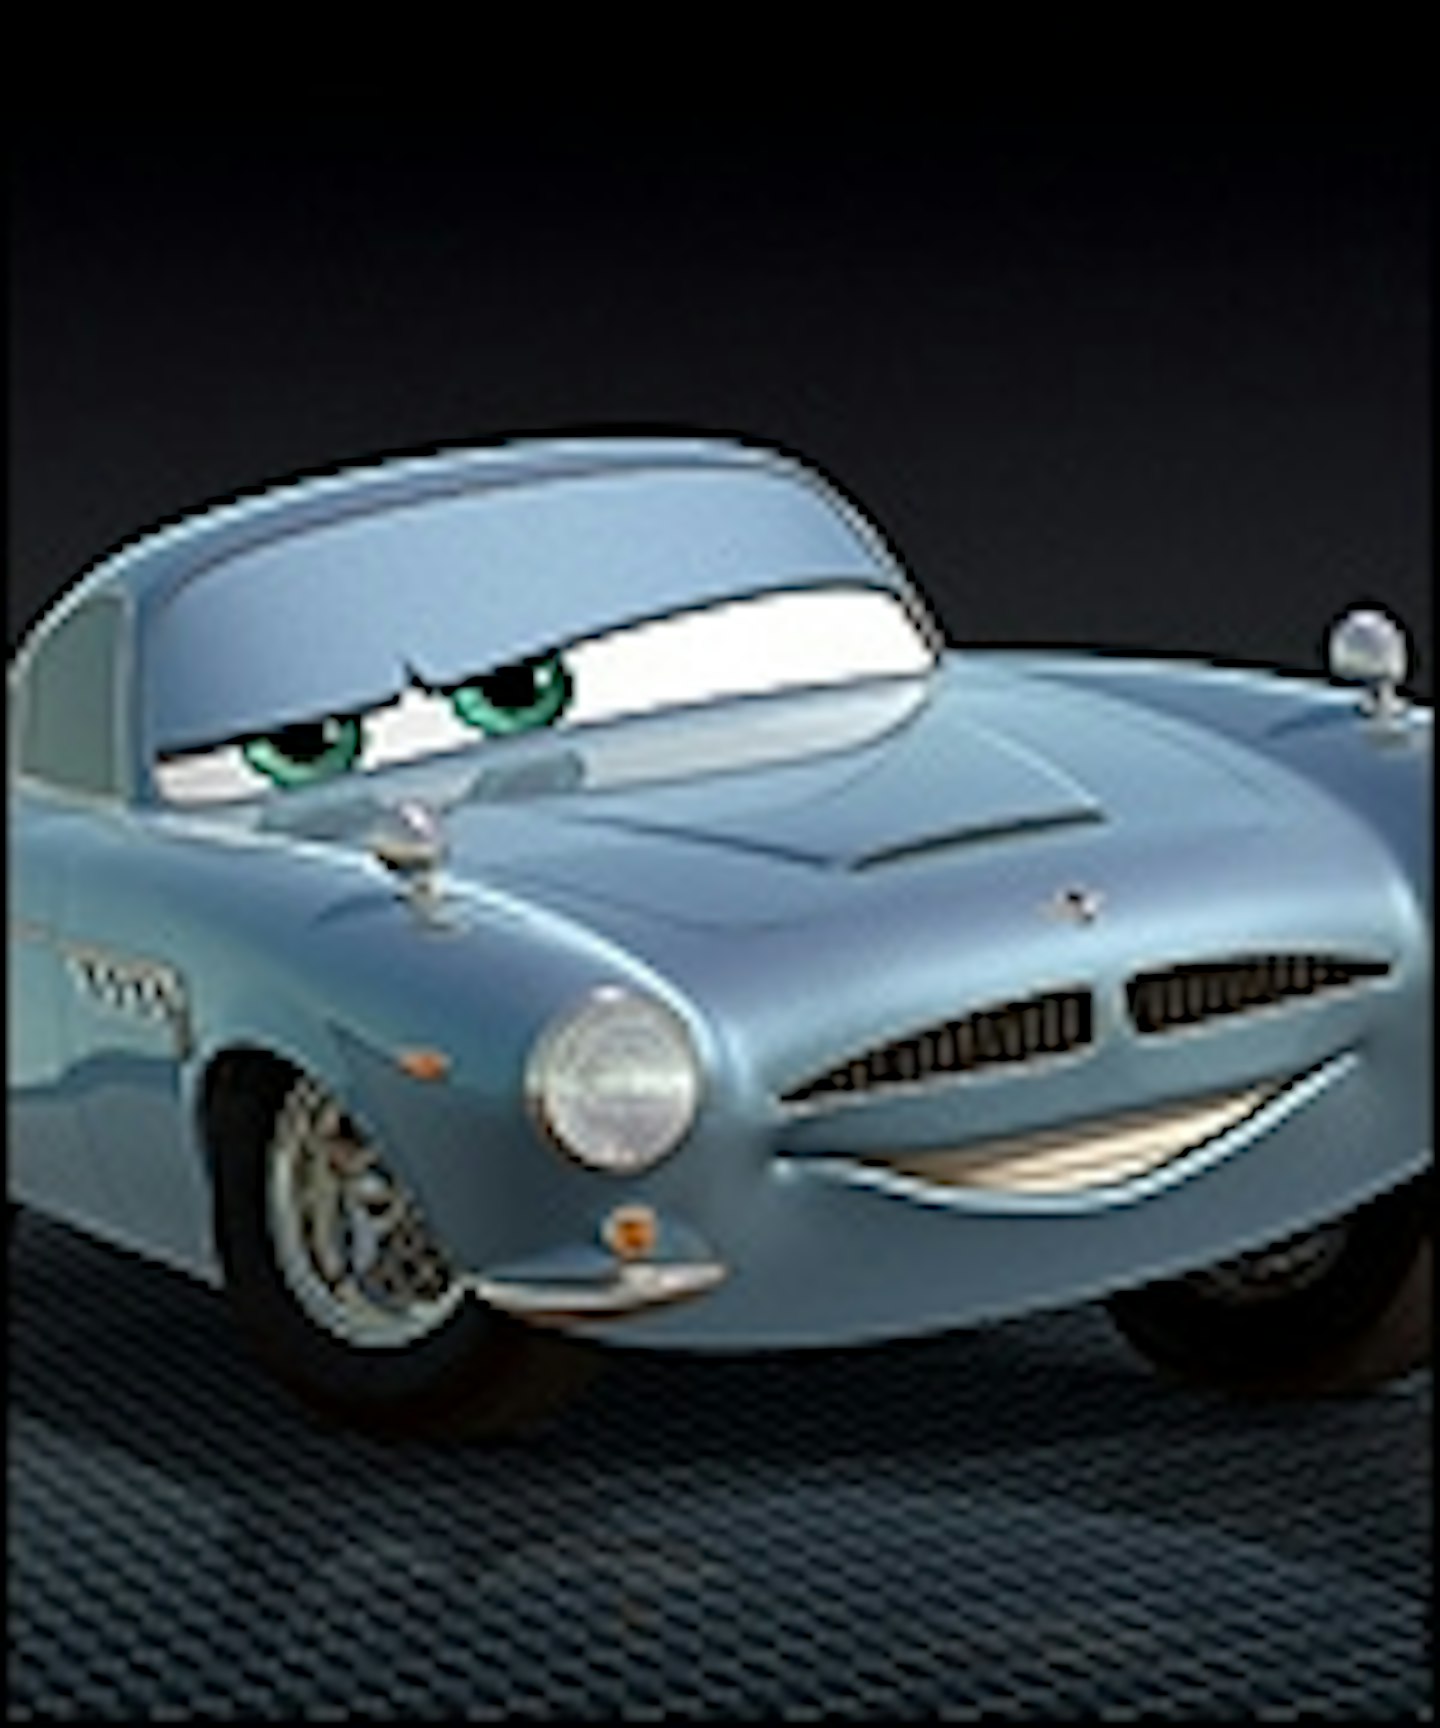 New Cars 2 Characters!